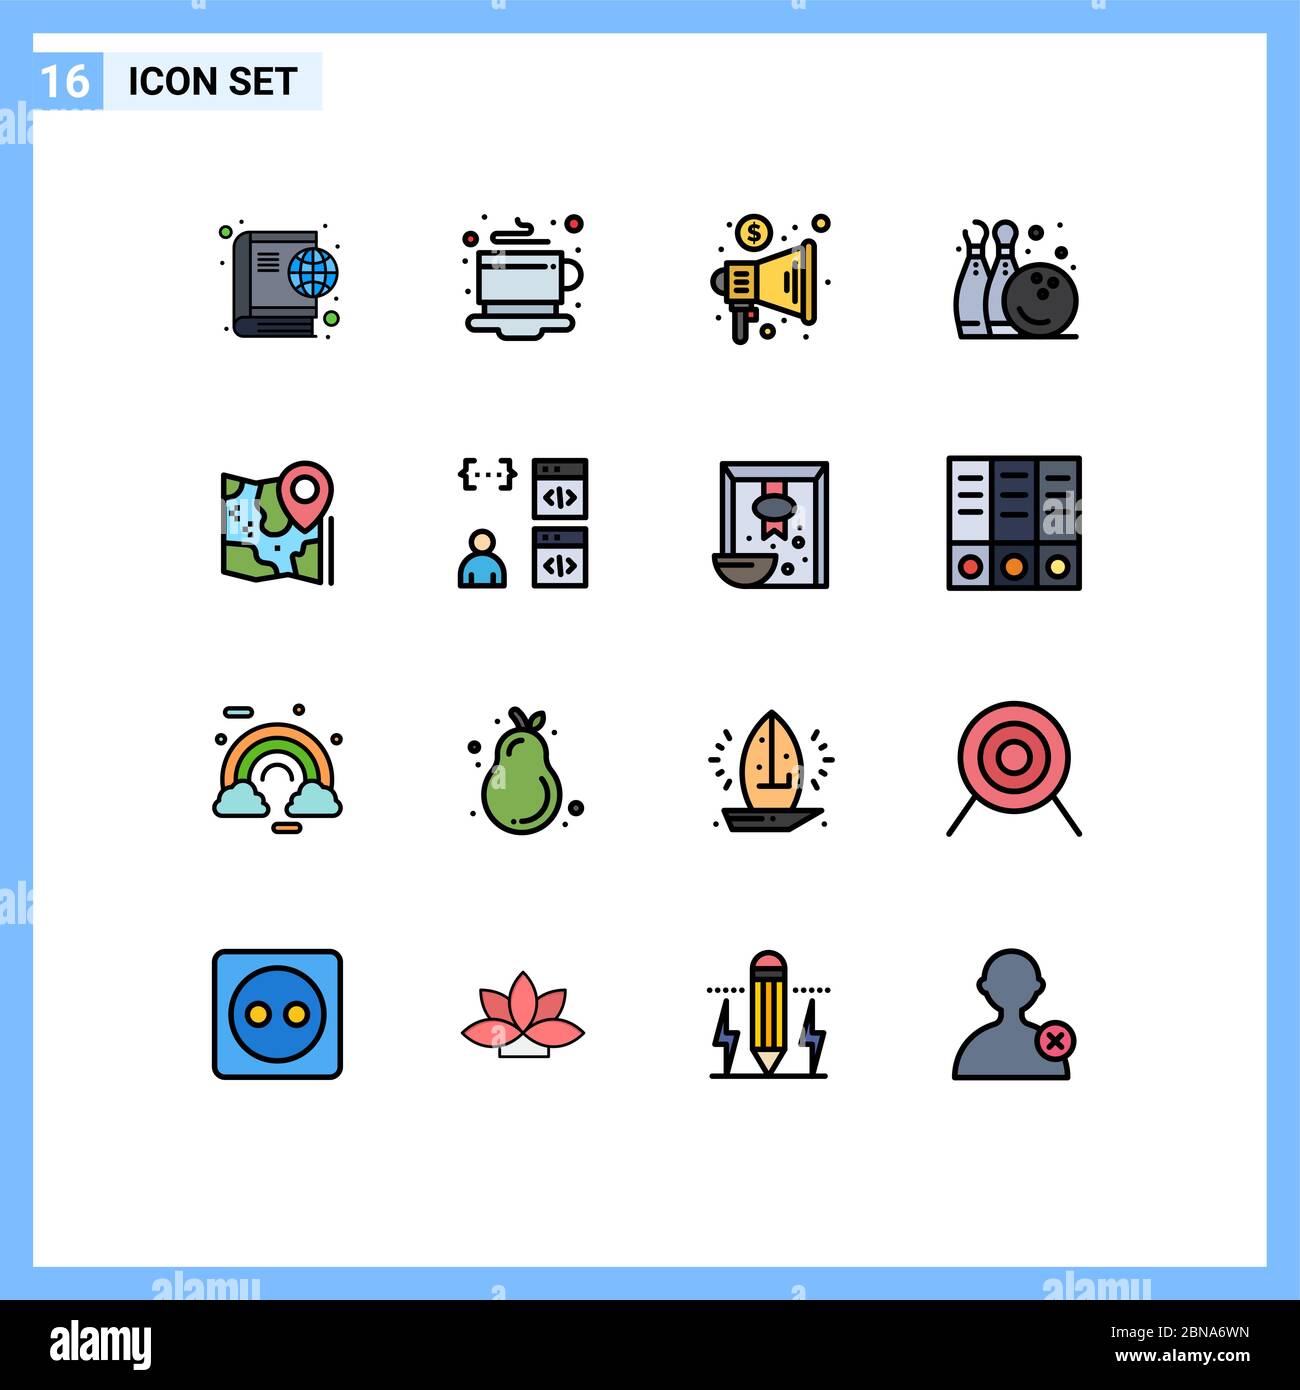 Pin on Game App Icon